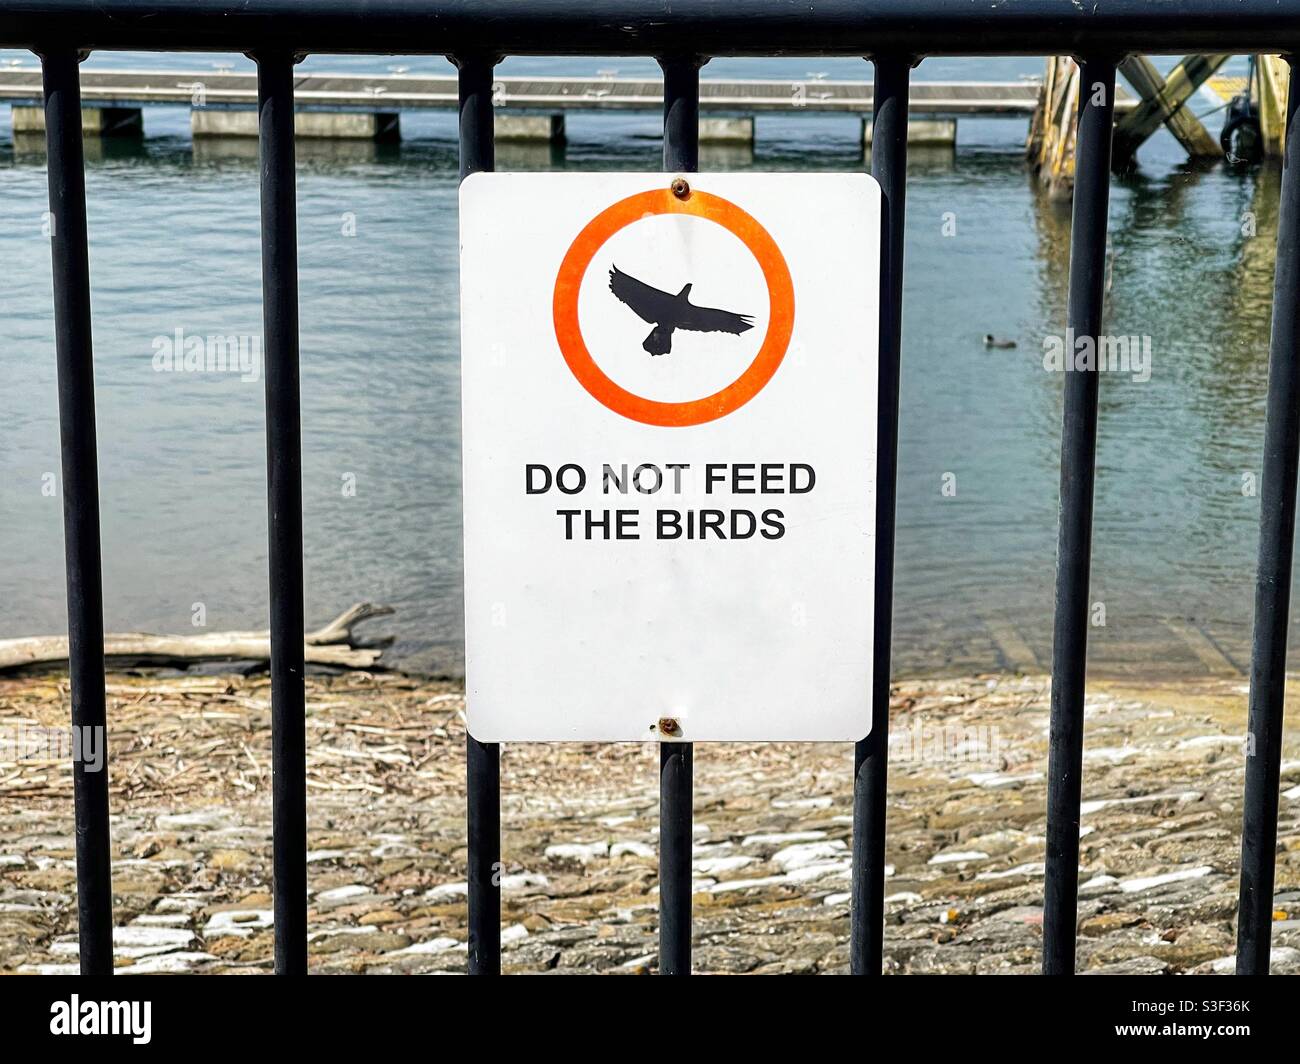 Sign asking visitors not to feed the birds on a city’s waterfront. No people. Stock Photo